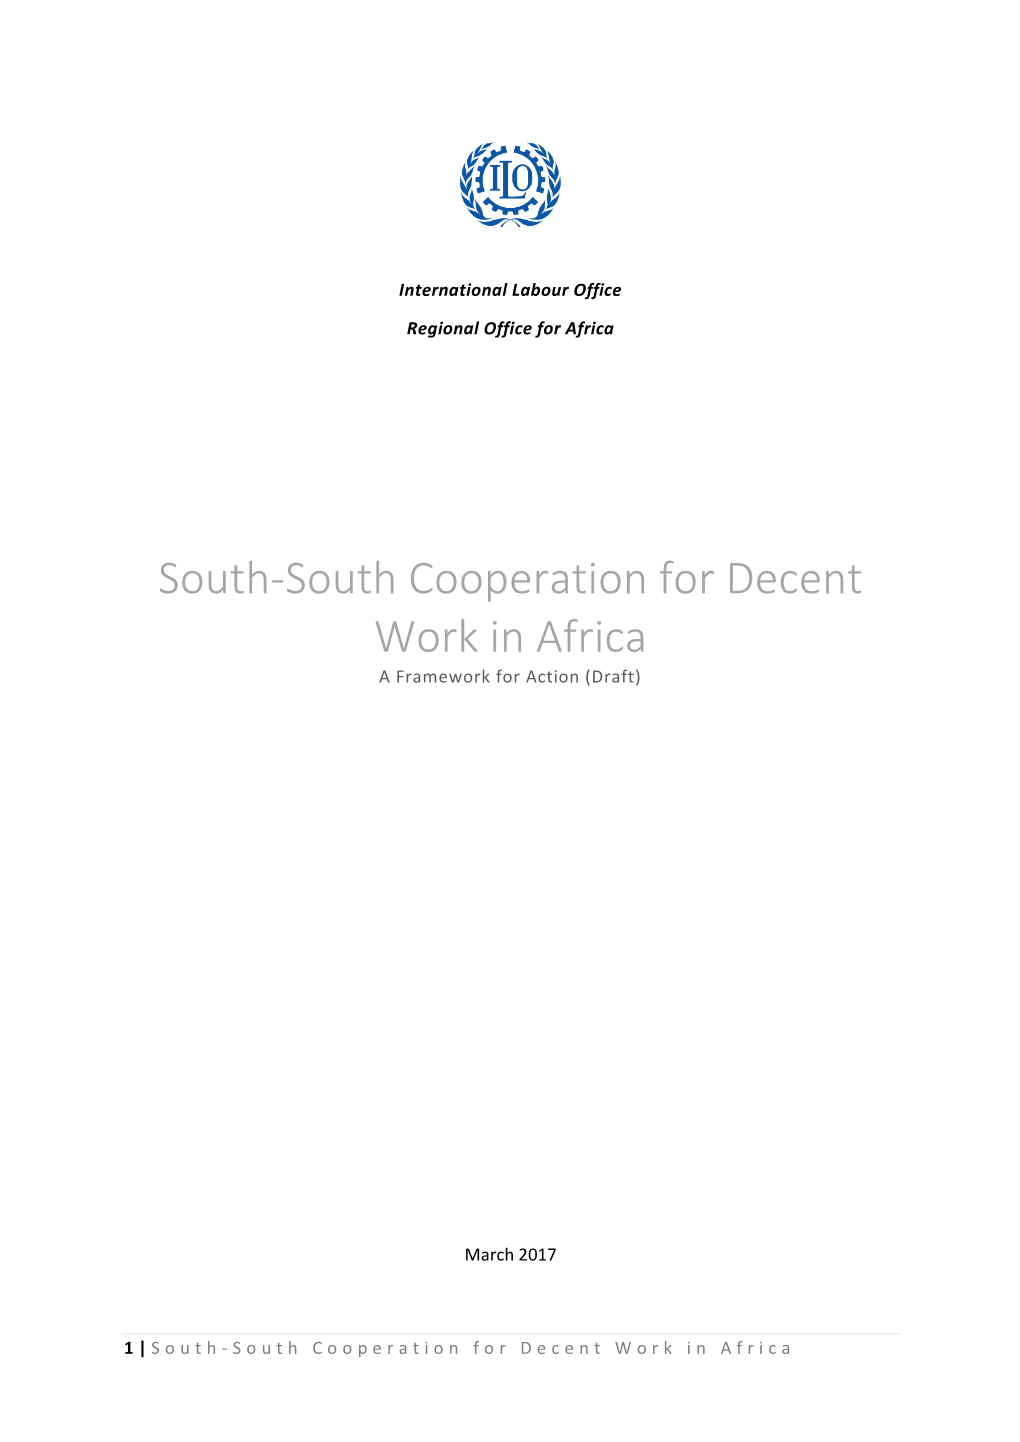 South-South Cooperation for Decent Work in Africa a Framework for Action (Draft)